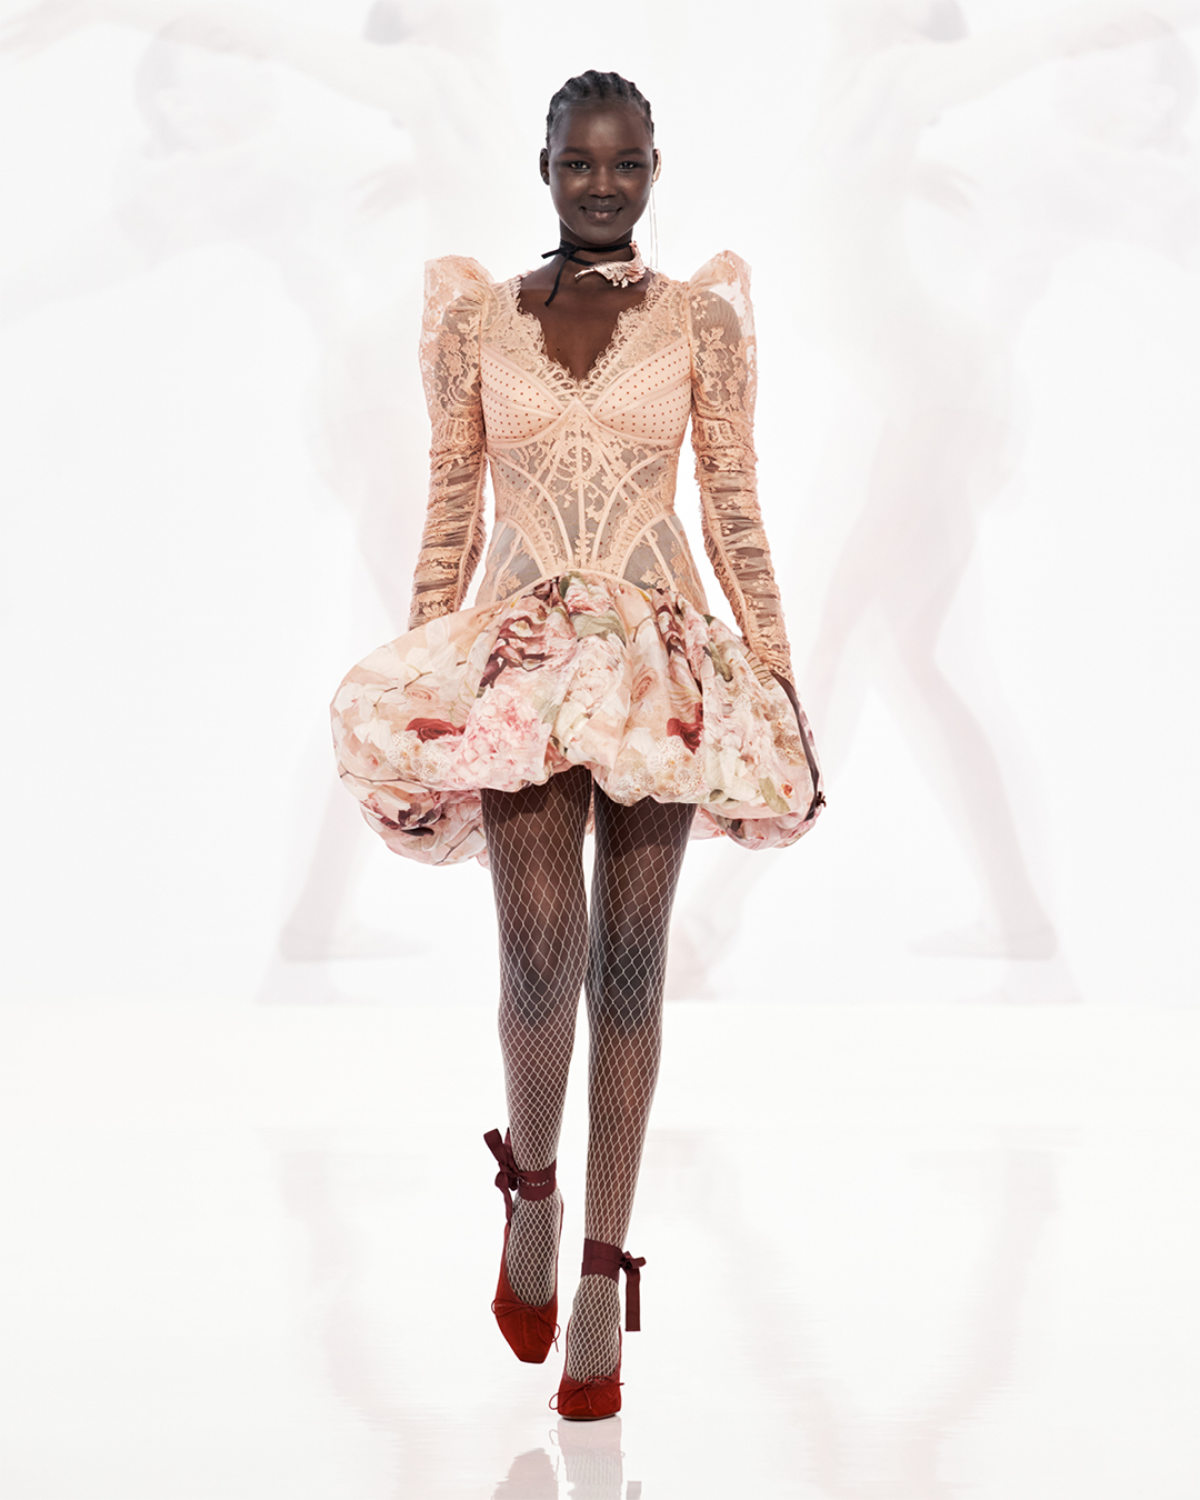 Zimmermann Presents Its New Spring Summer 2022 Collection: The Dancer